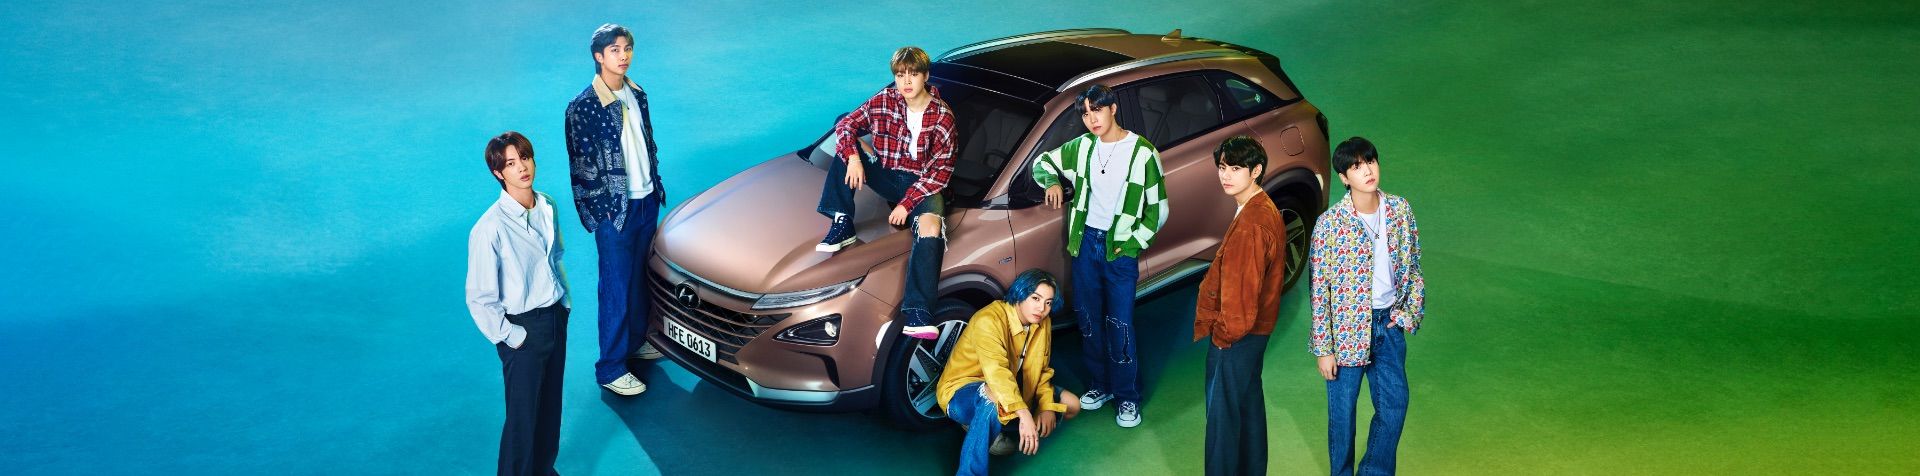 All 7 members of South Korean boy band BTS standing around a Hyundai NEXO car with a half blue, half green background behind them